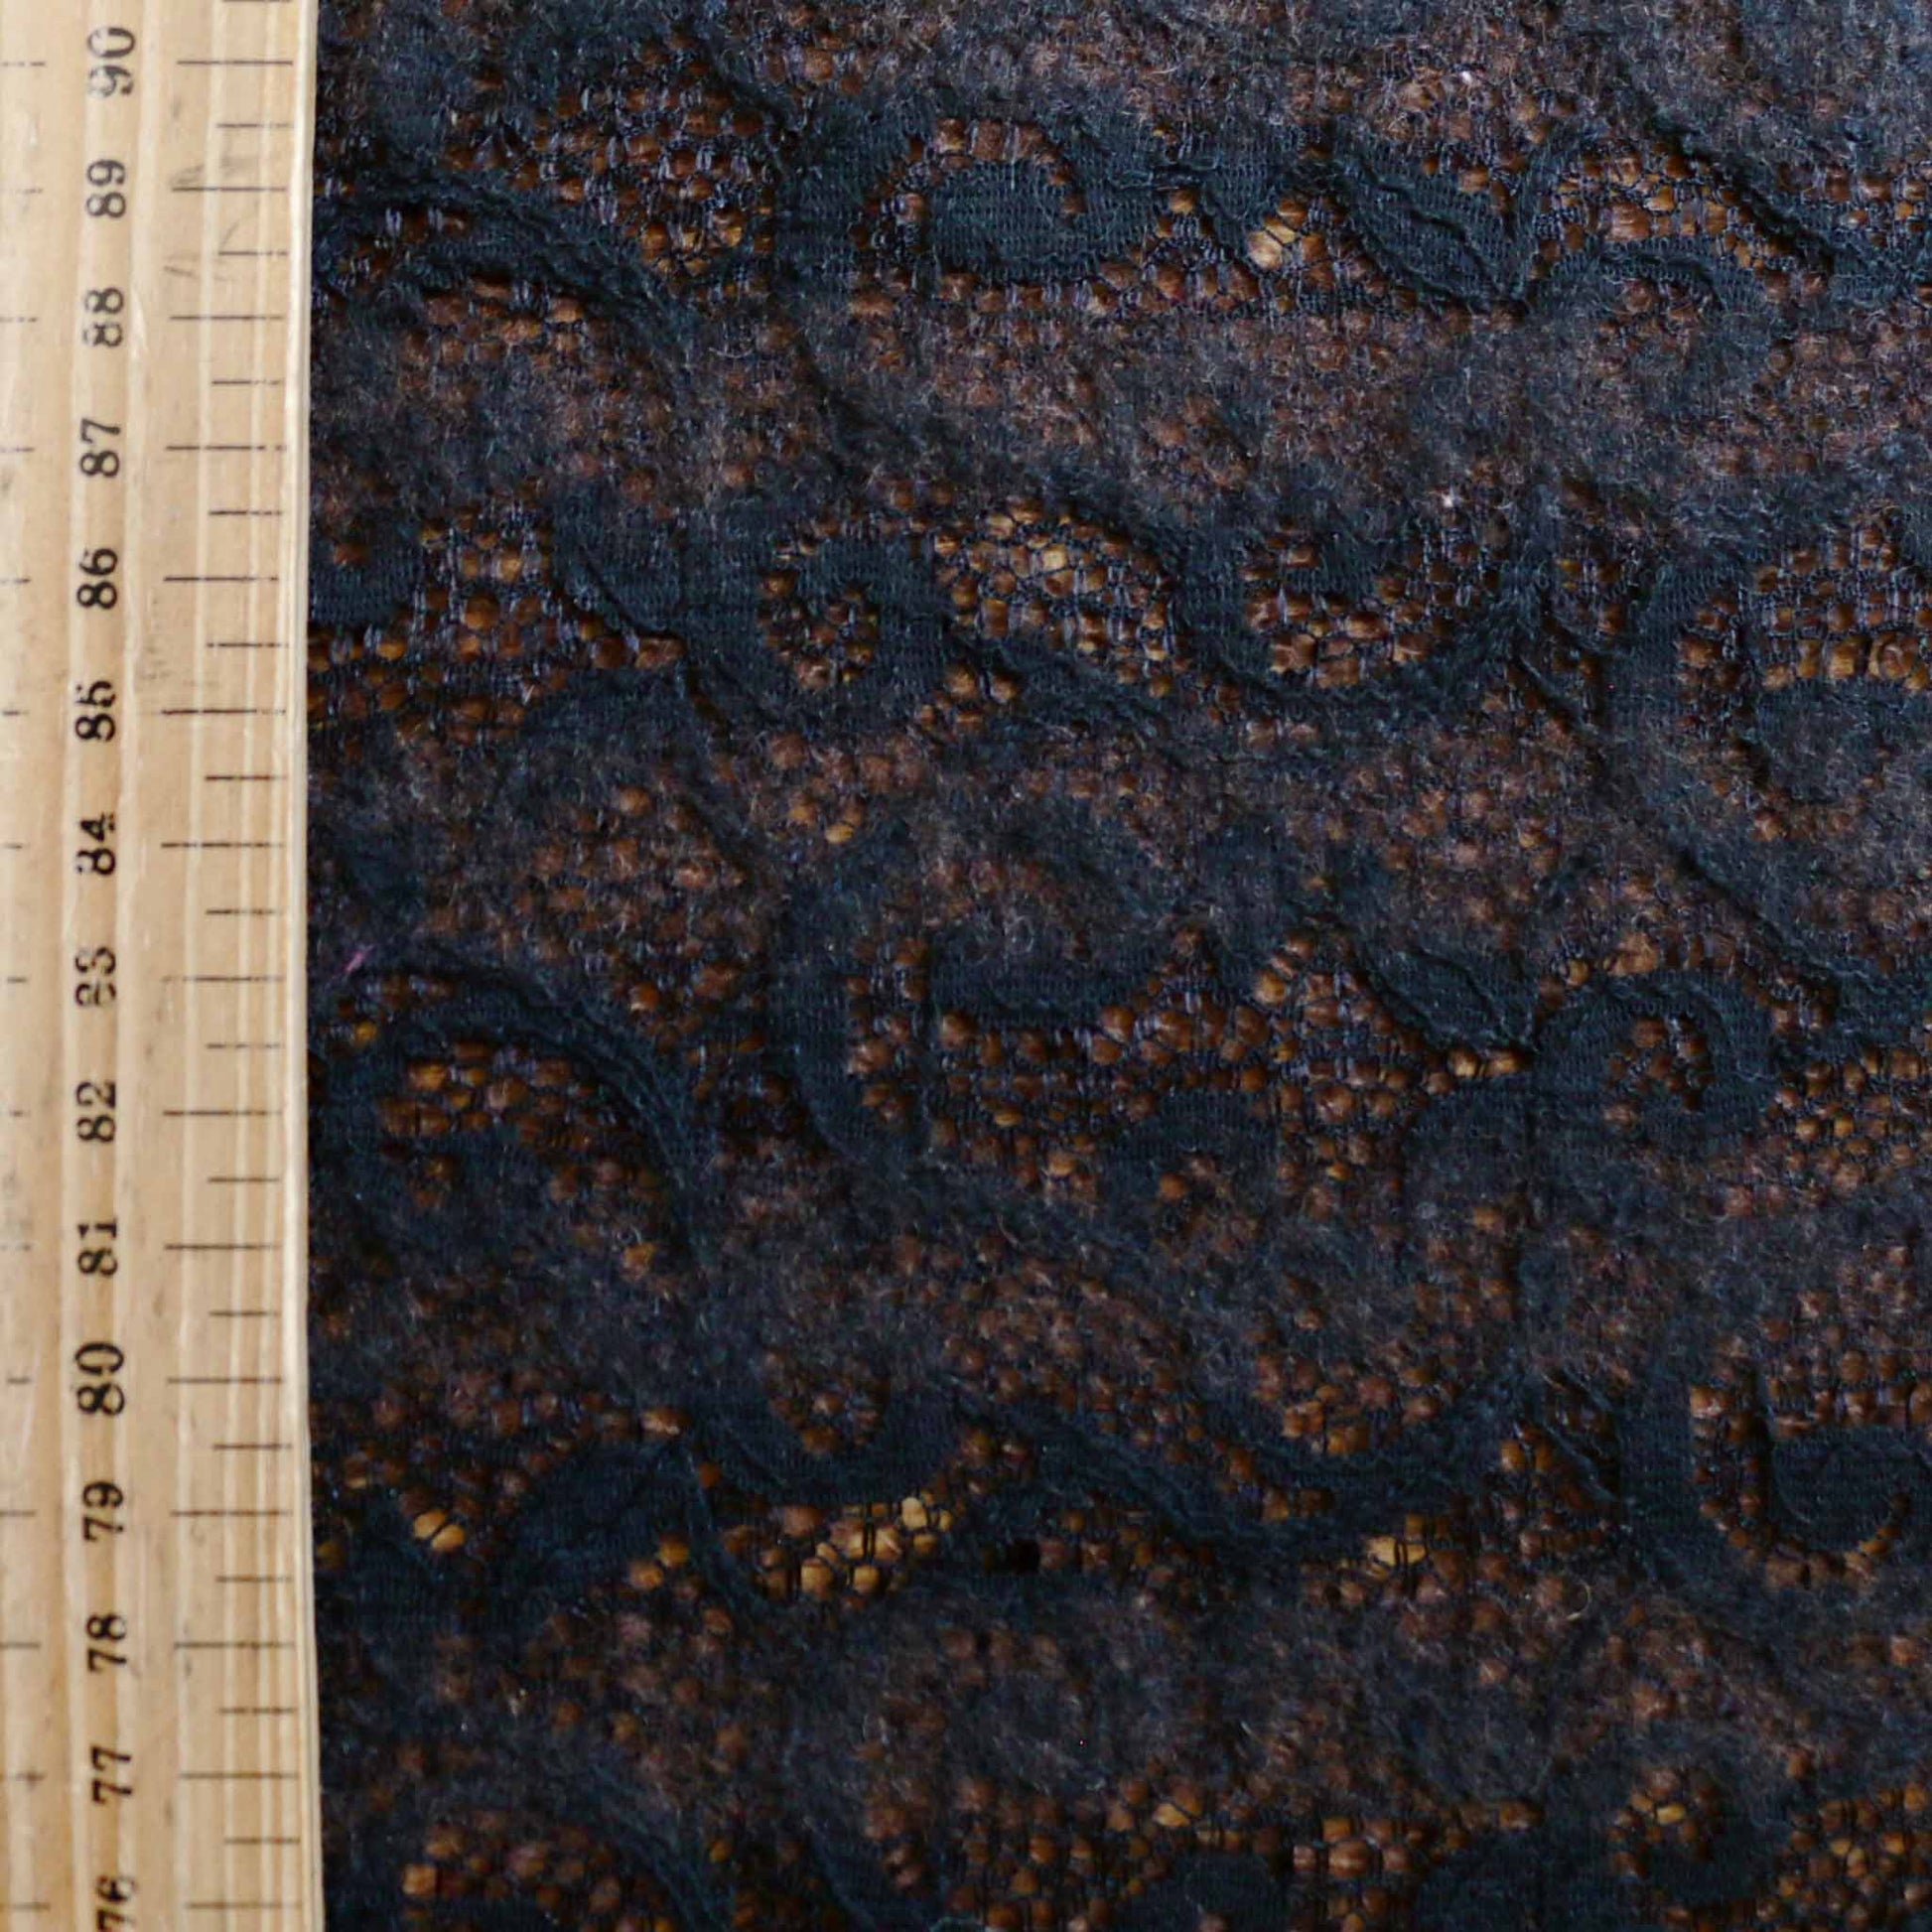 metre bonded wool in brown with black lace floral pattern stretchy dressmaking fabric